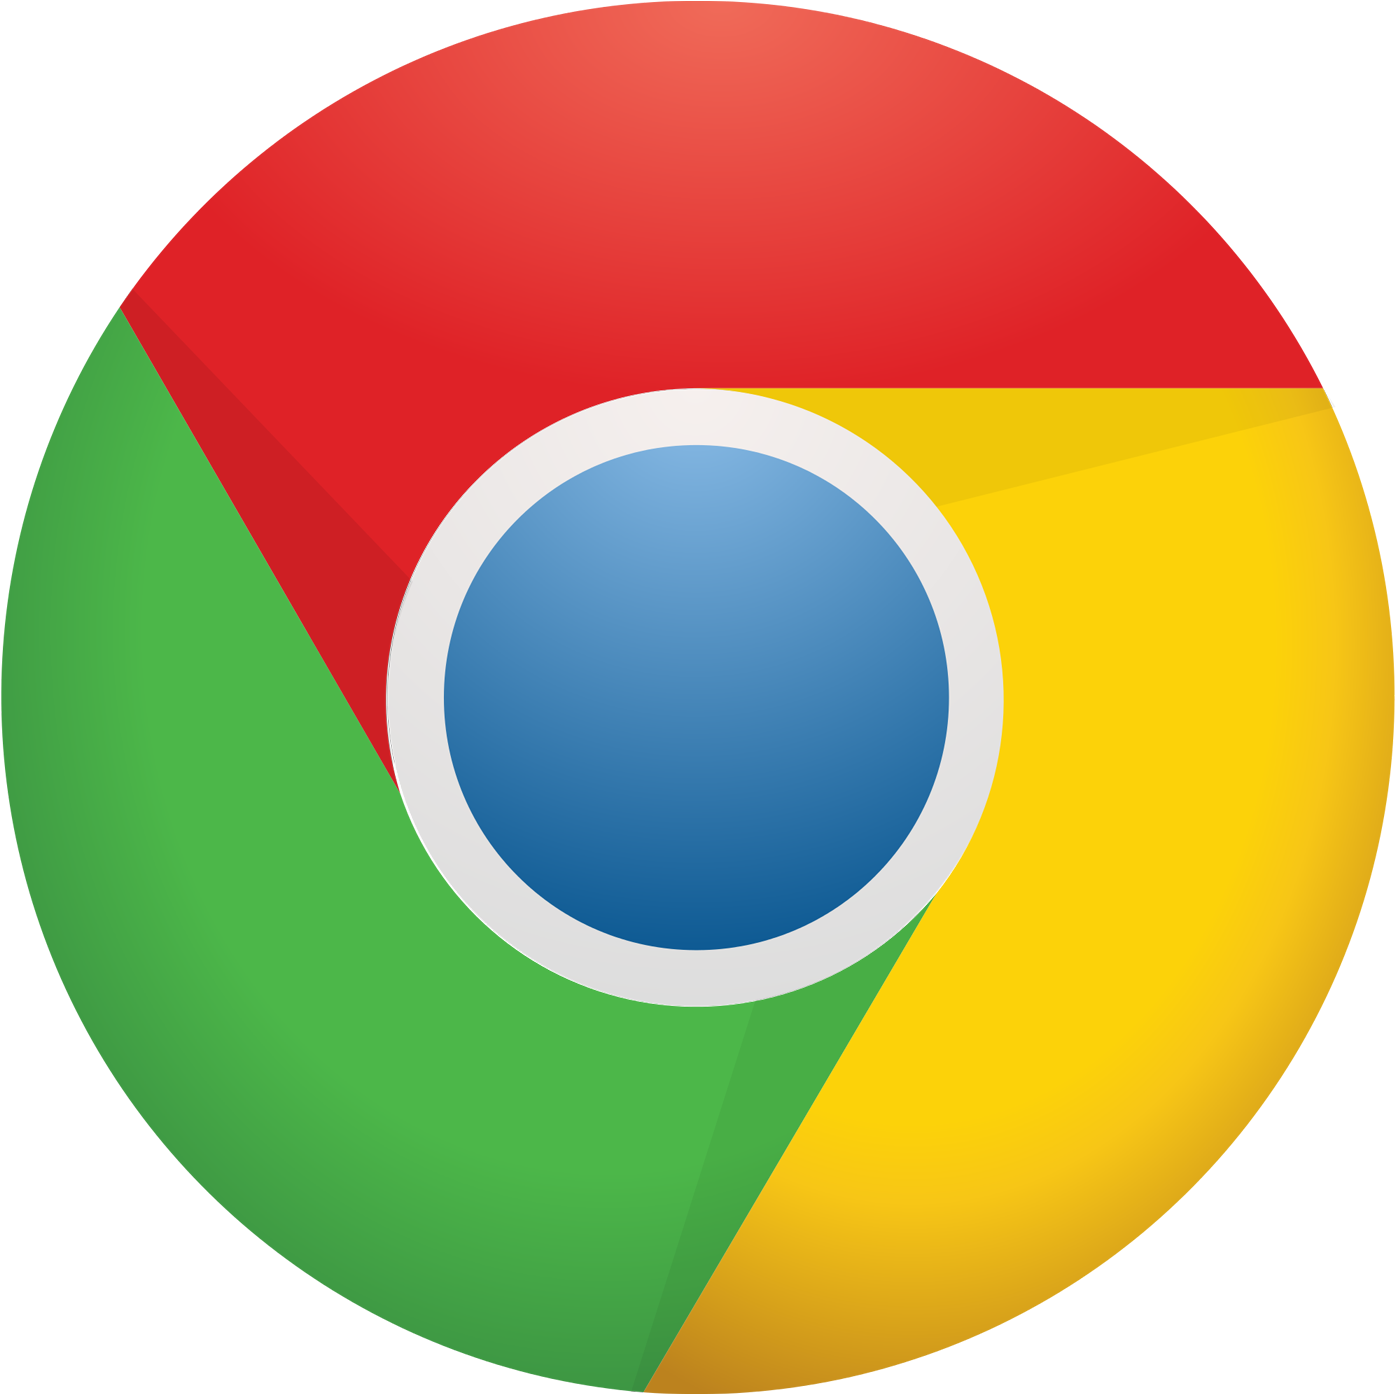 Download Old Versions Of Google Chrome For Mac - Google Chrome Logo Hd (2835x2835)